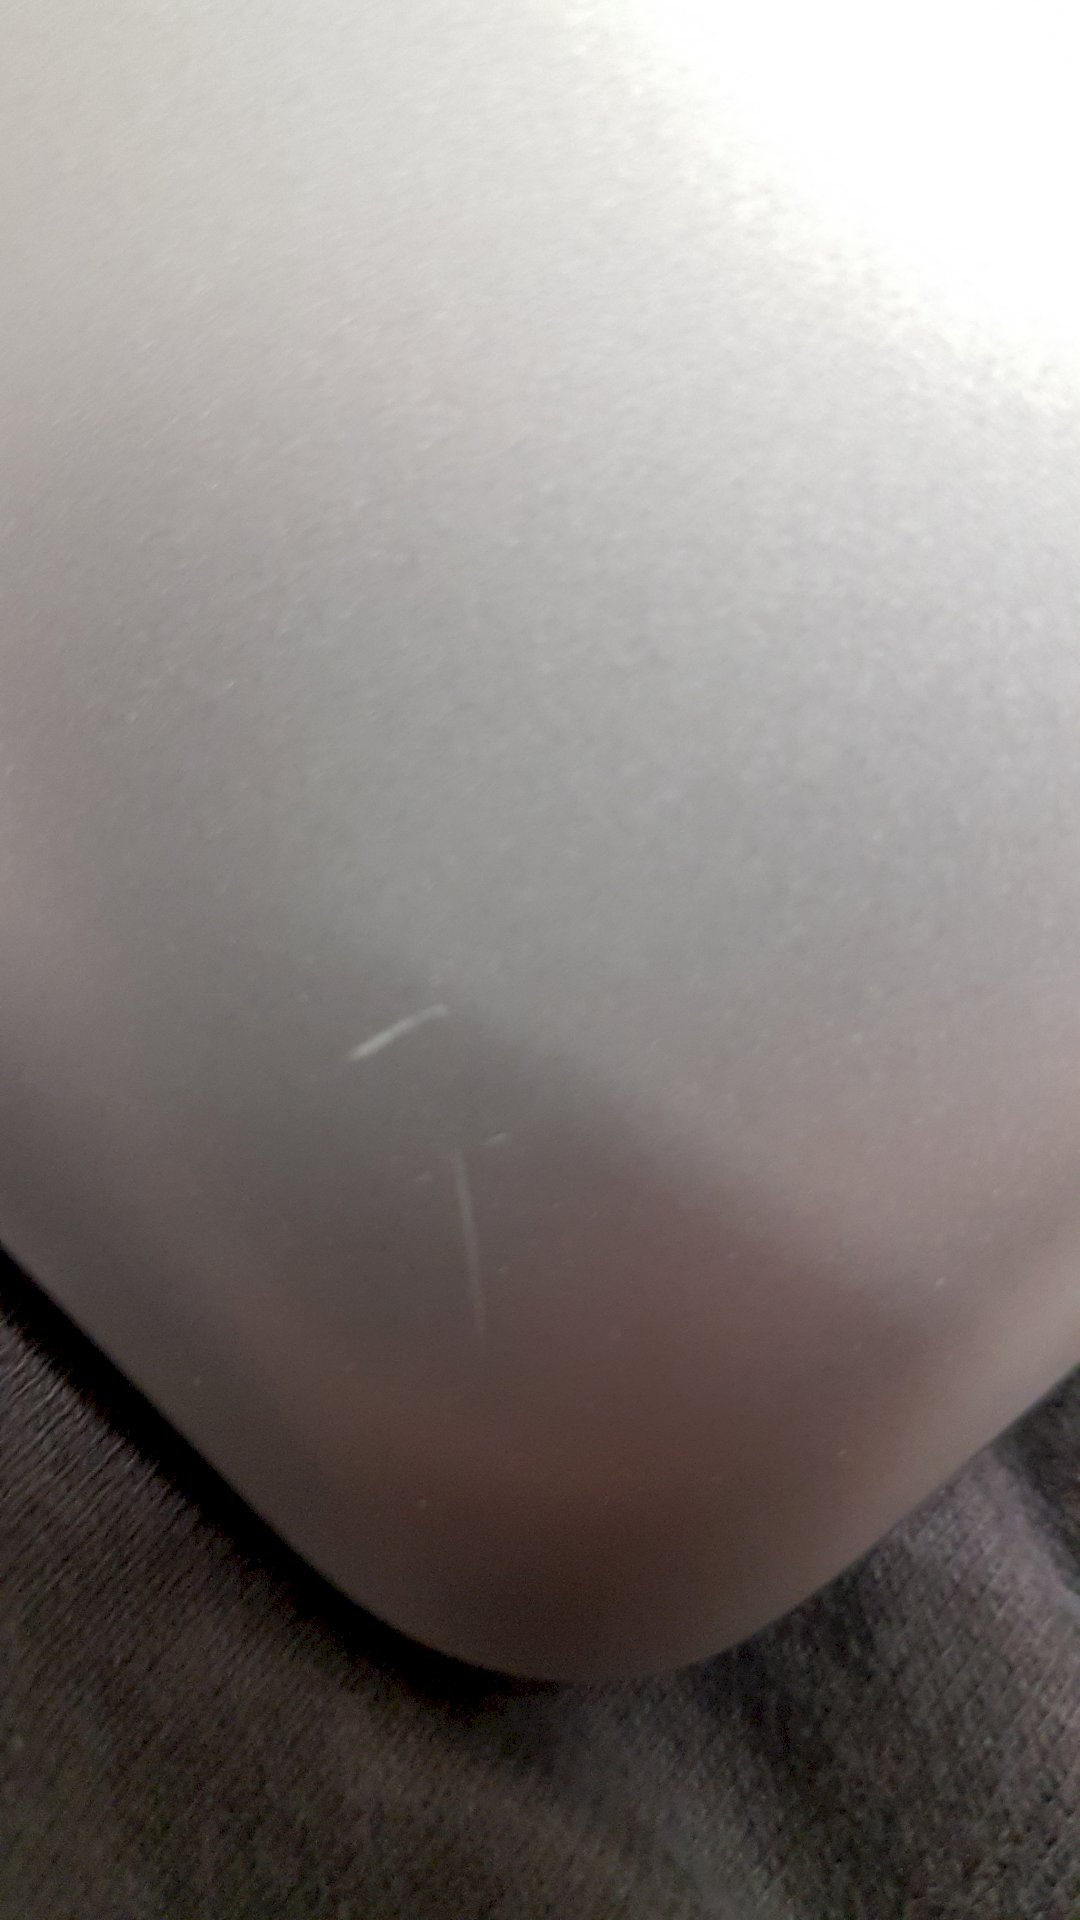 How to remove scratches from a laptop - 1